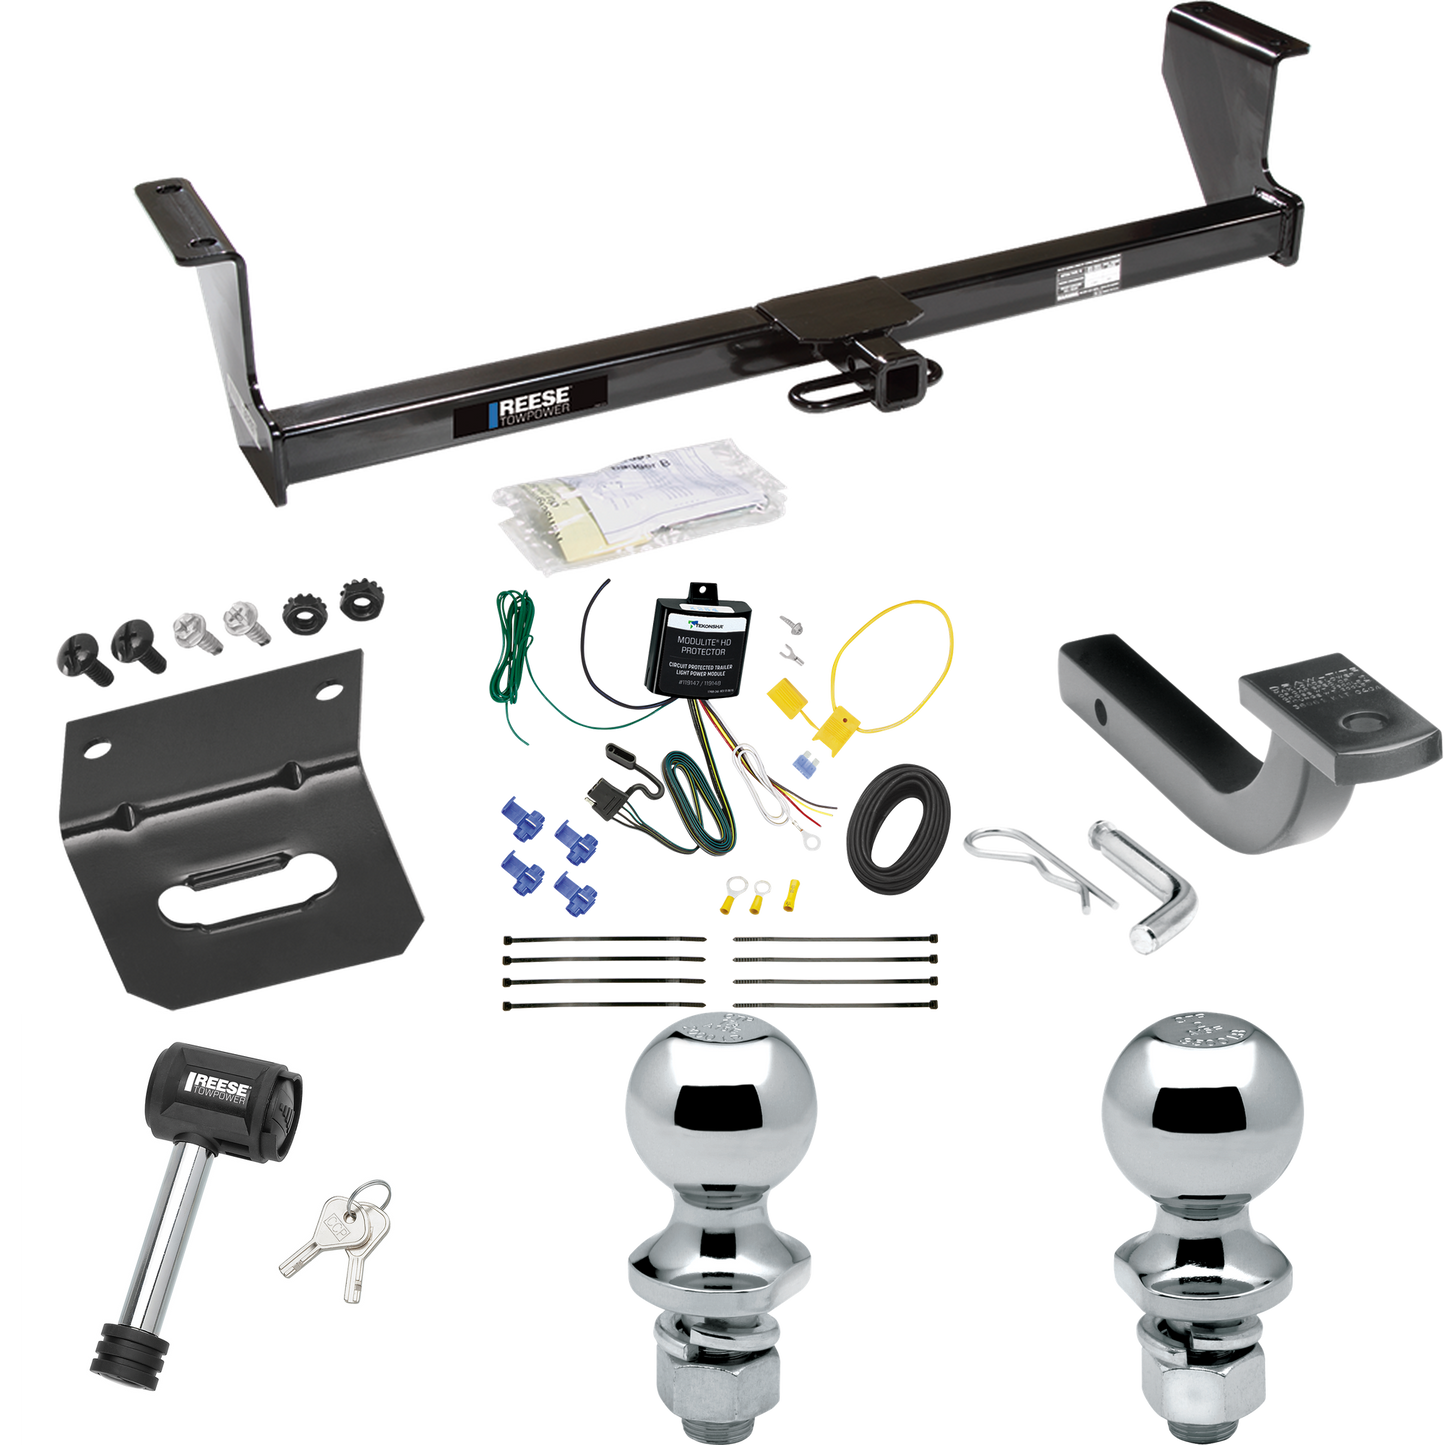 Fits 2001-2007 Volvo V70 Trailer Hitch Tow PKG w/ 4-Flat Wiring Harness + Draw-Bar + 1-7/8" + 2" Ball + Wiring Bracket + Hitch Lock (For Wagon Models) By Reese Towpower